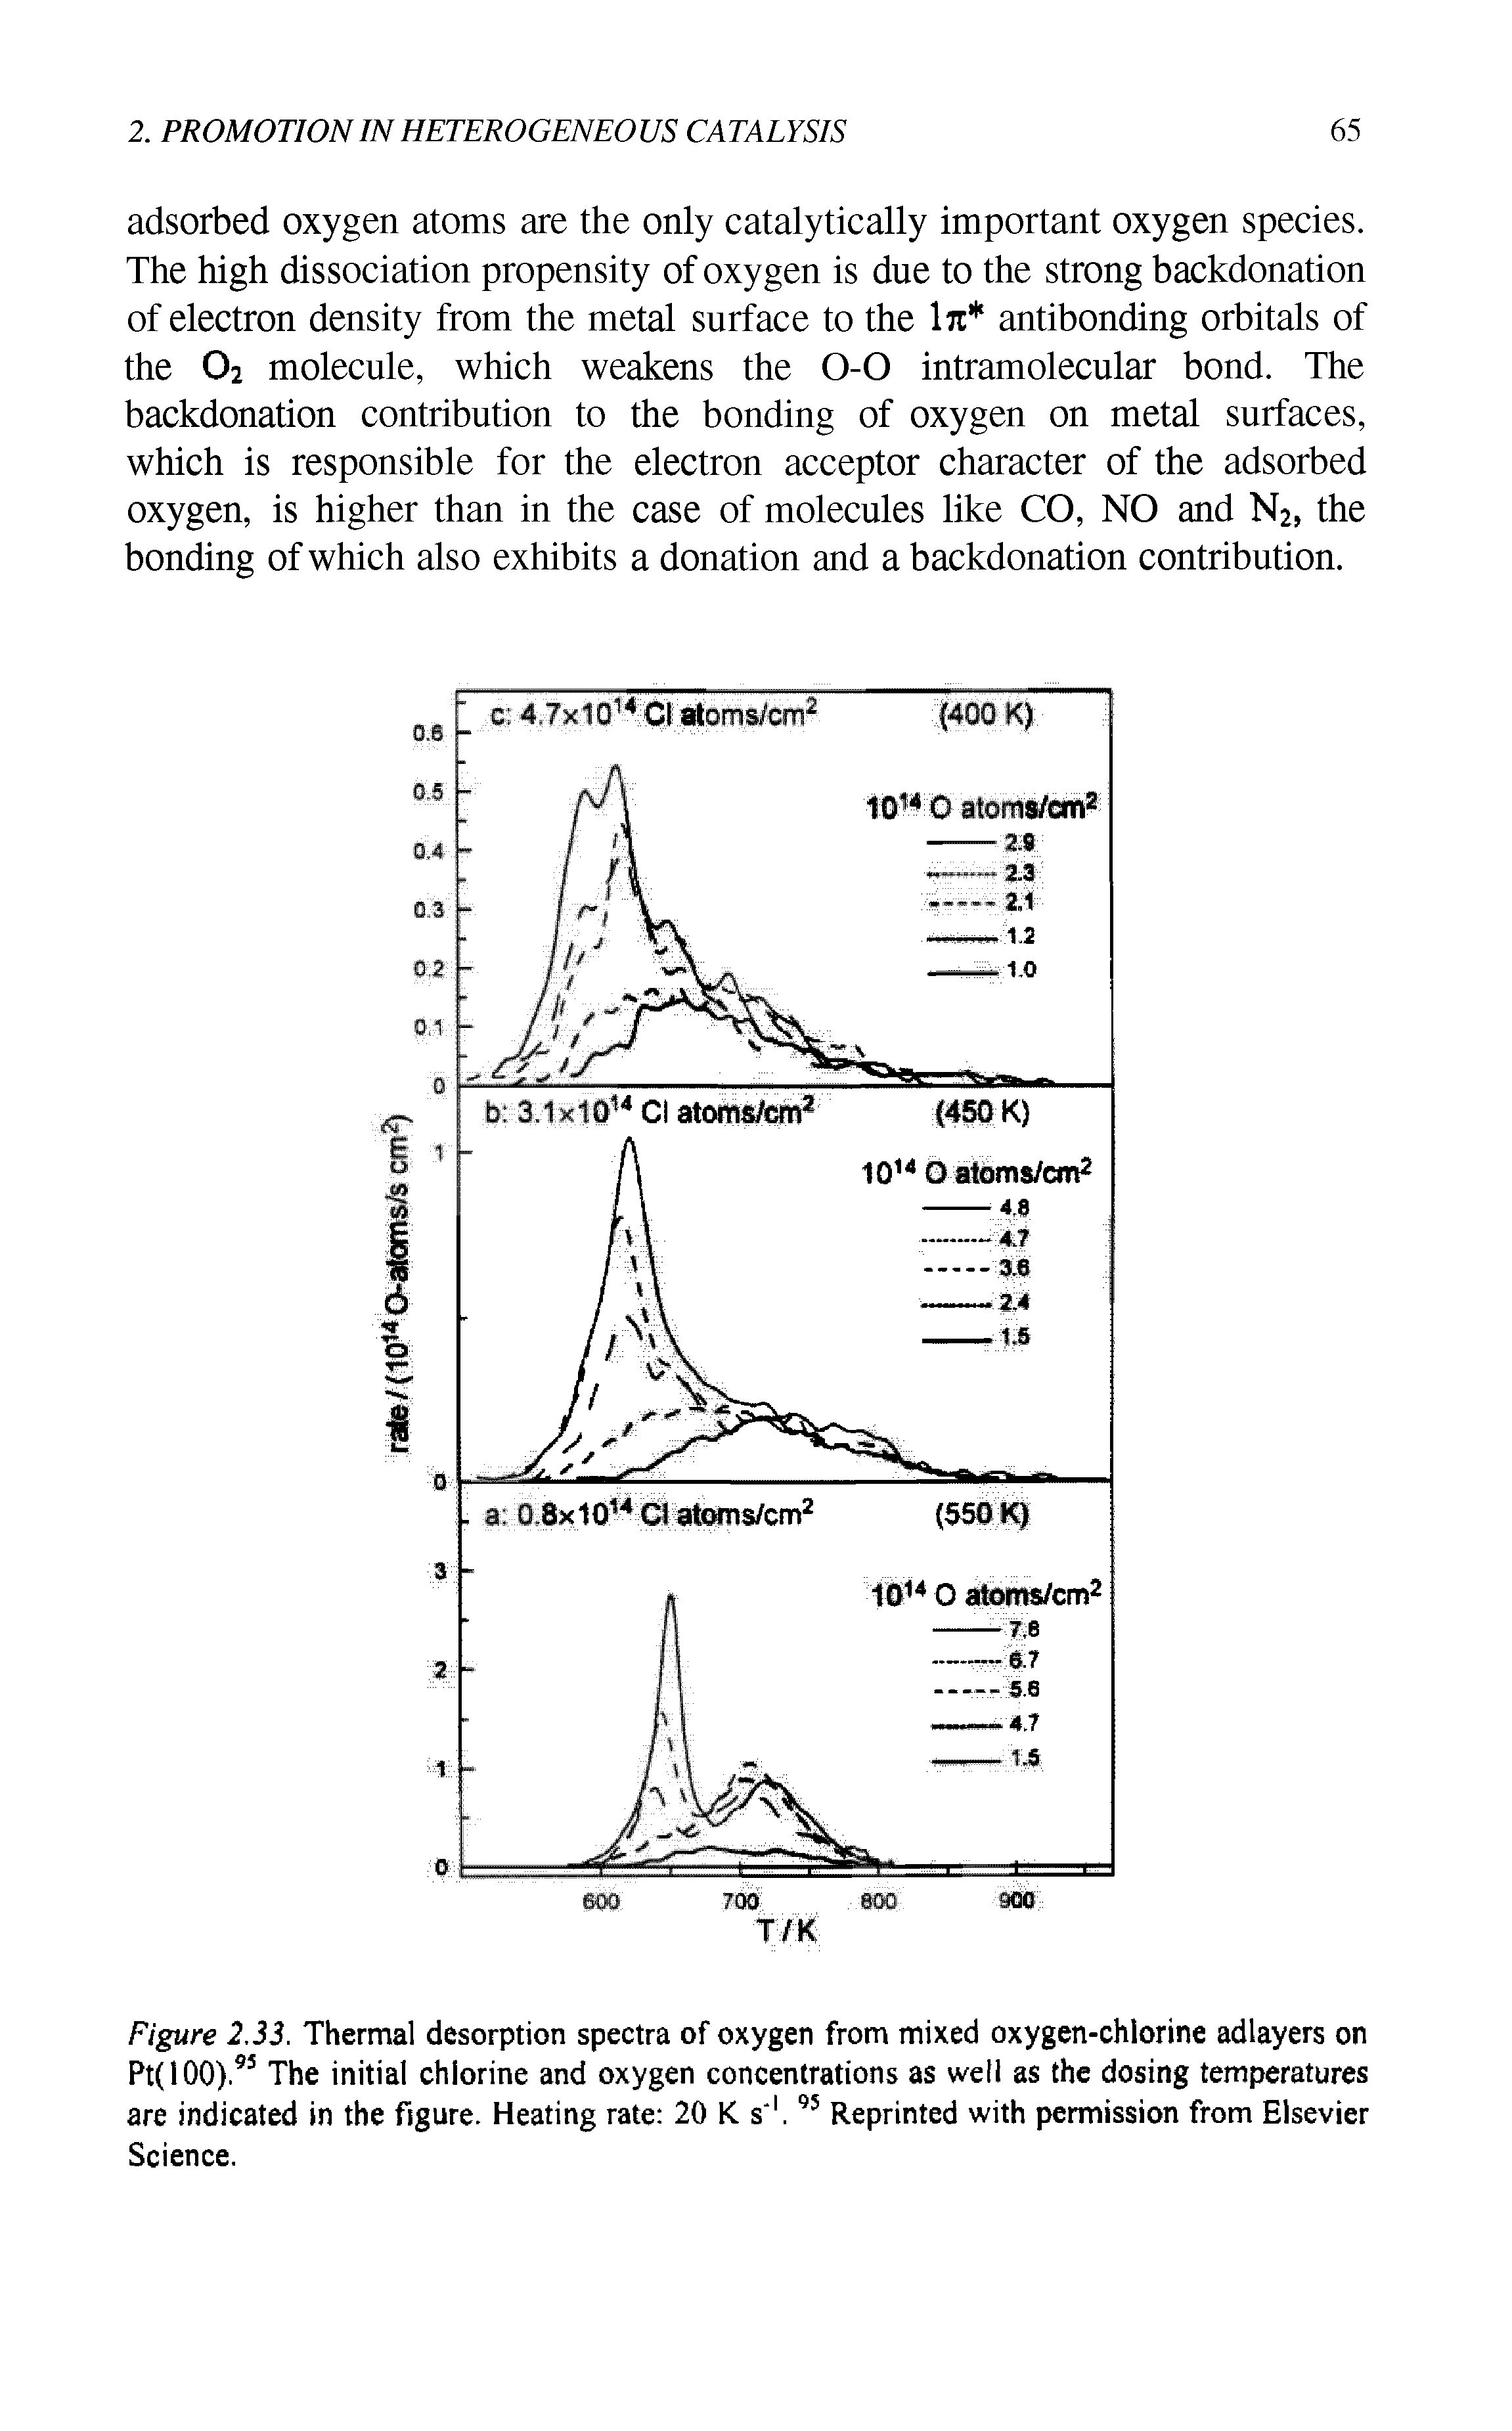 Figure 2.33. Thermal desorption spectra of oxygen from mixed oxygen-chlorine adlayers on Pt(100).9S The initial chlorine and oxygen concentrations as well as the dosing temperatures are indicated in the figure. Heating rate 20 K s 1.95 Reprinted with permission from Elsevier Science.